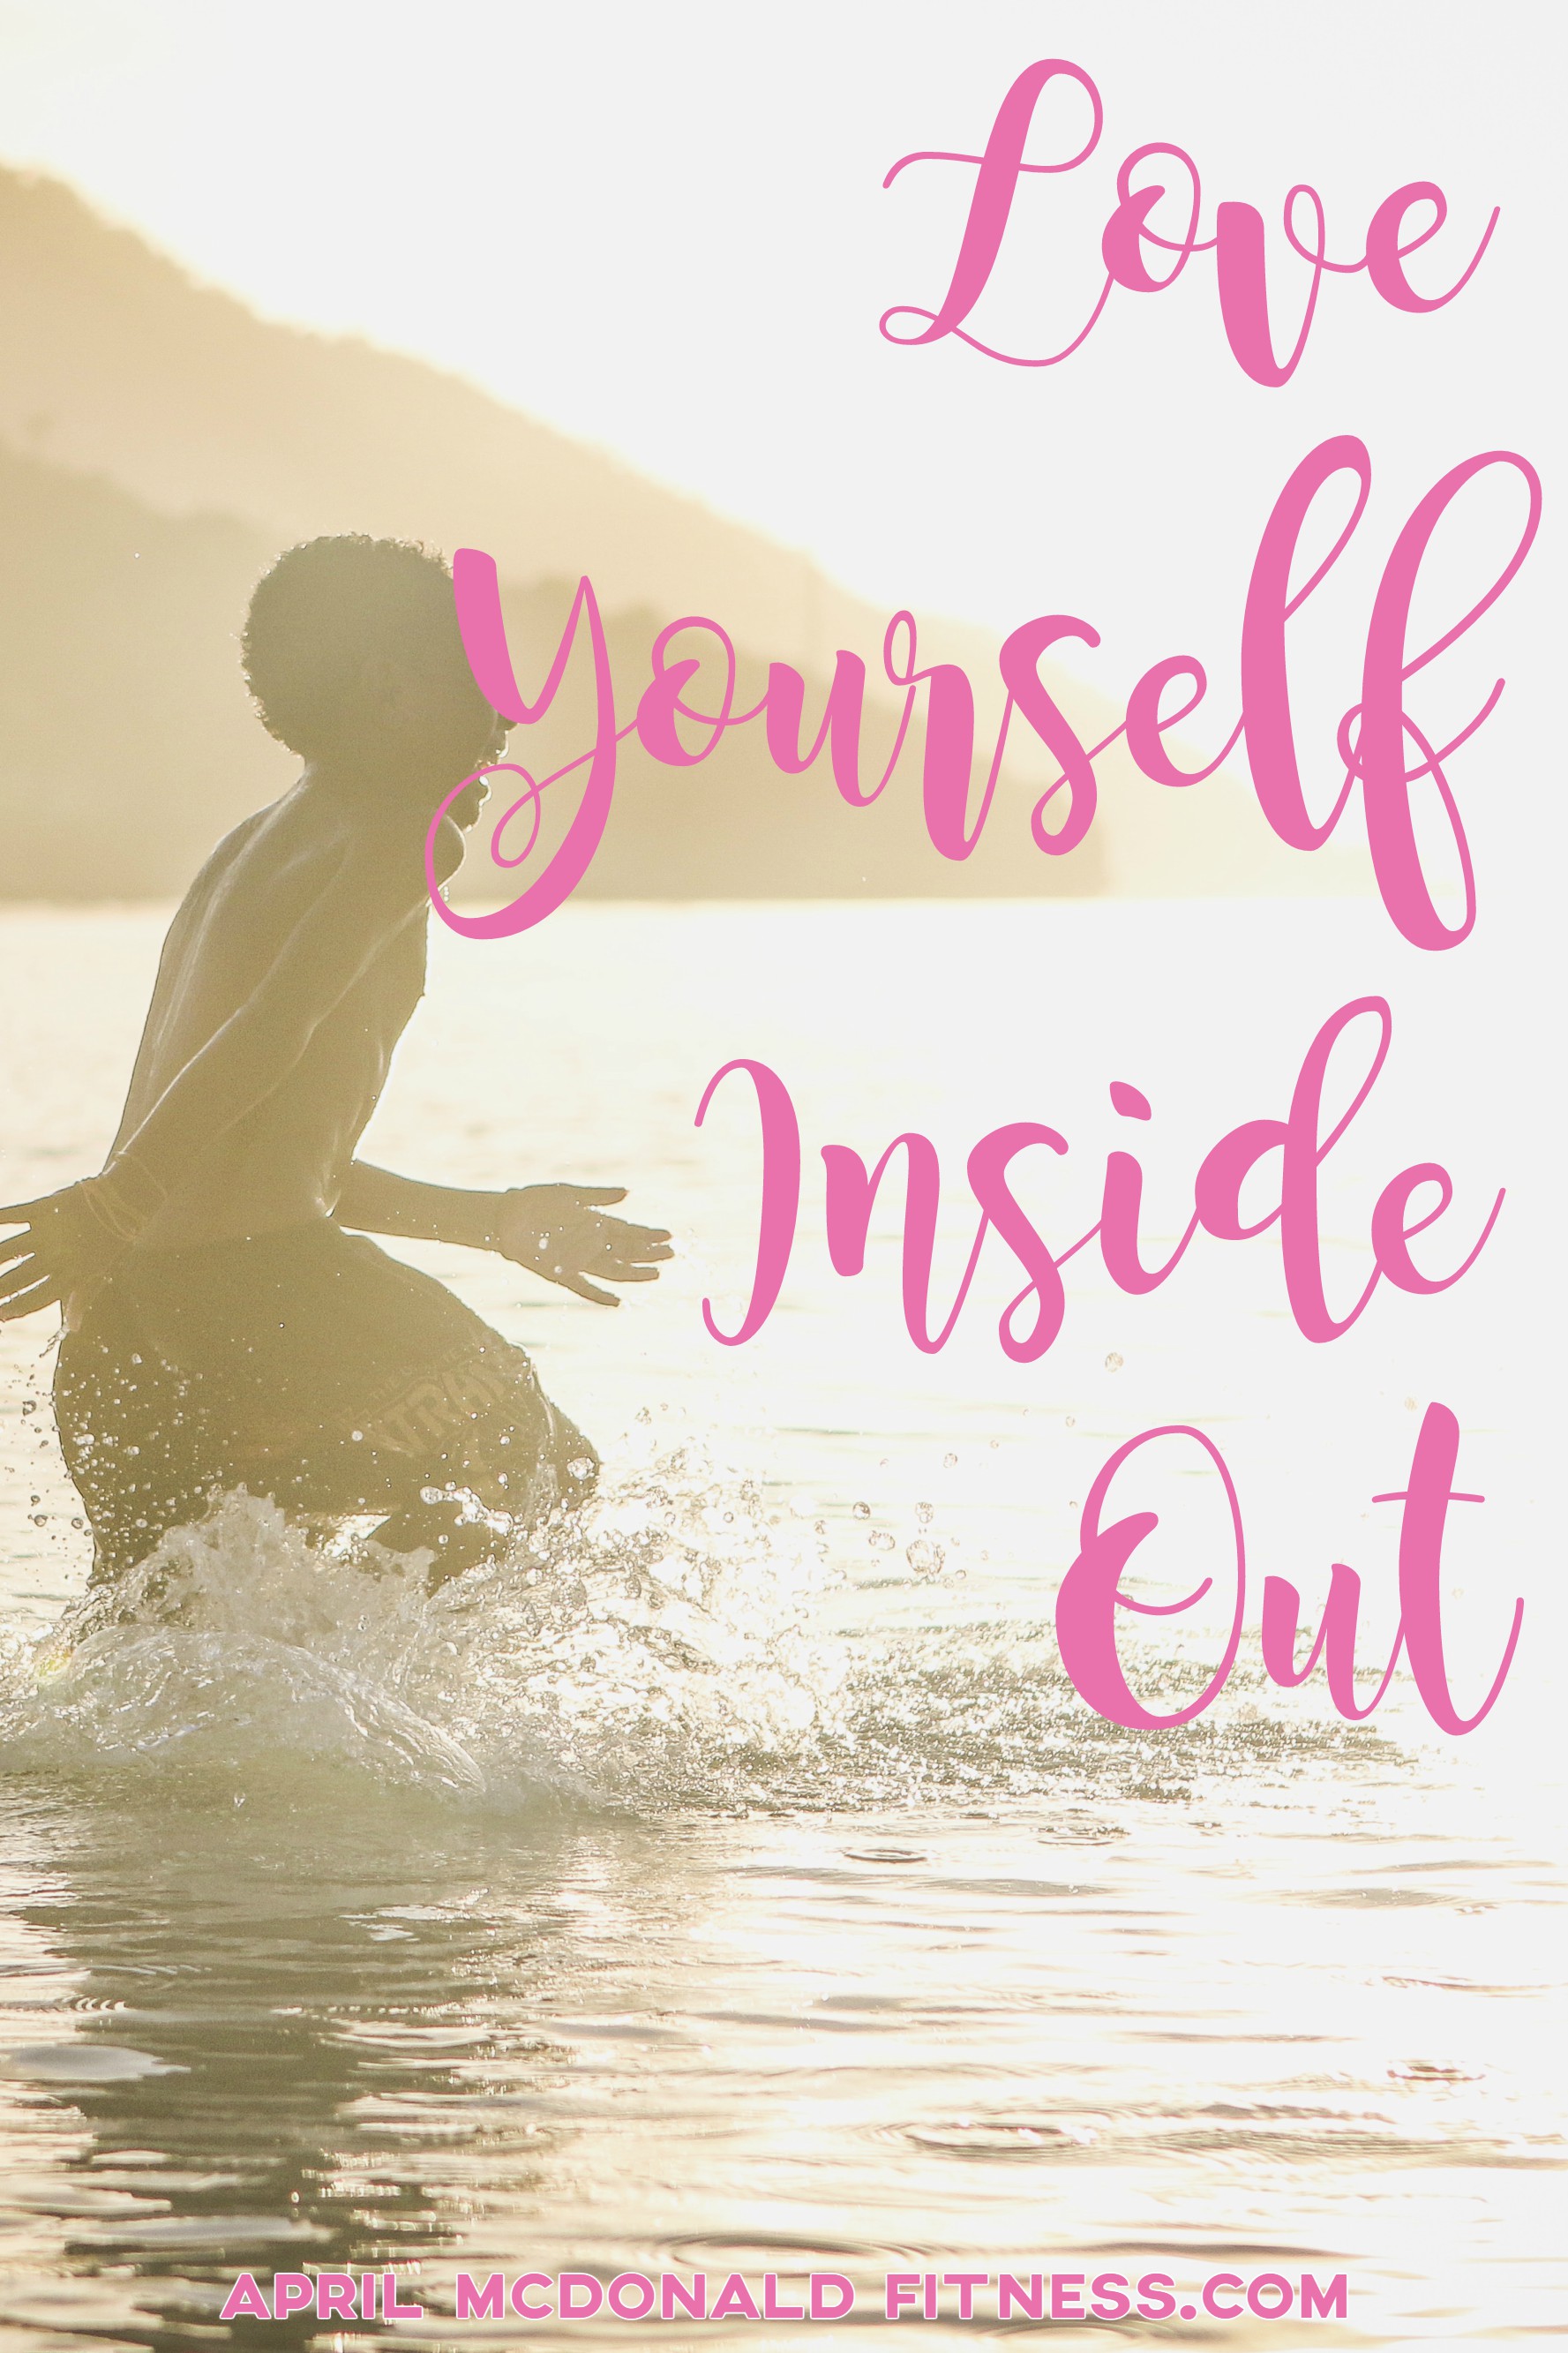 Love yourself inside out and you can accomplish great things. One way to do this is to become a beachbody coach! Contact me for more information!